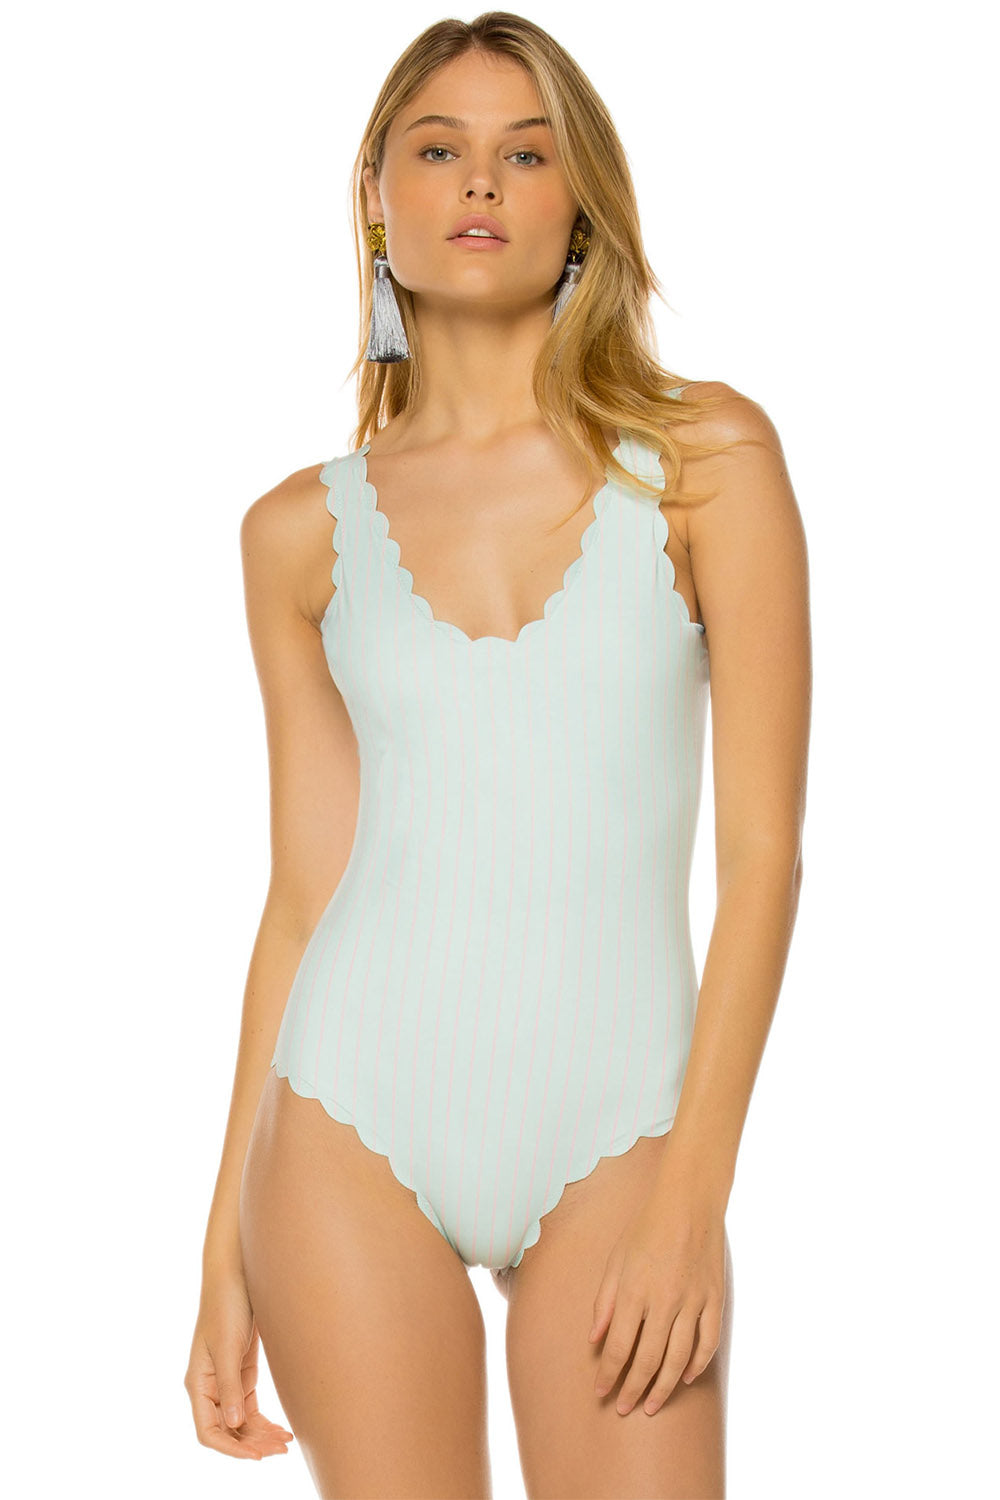 Iyasson Floral Print Laciness One-piece Swimsuit